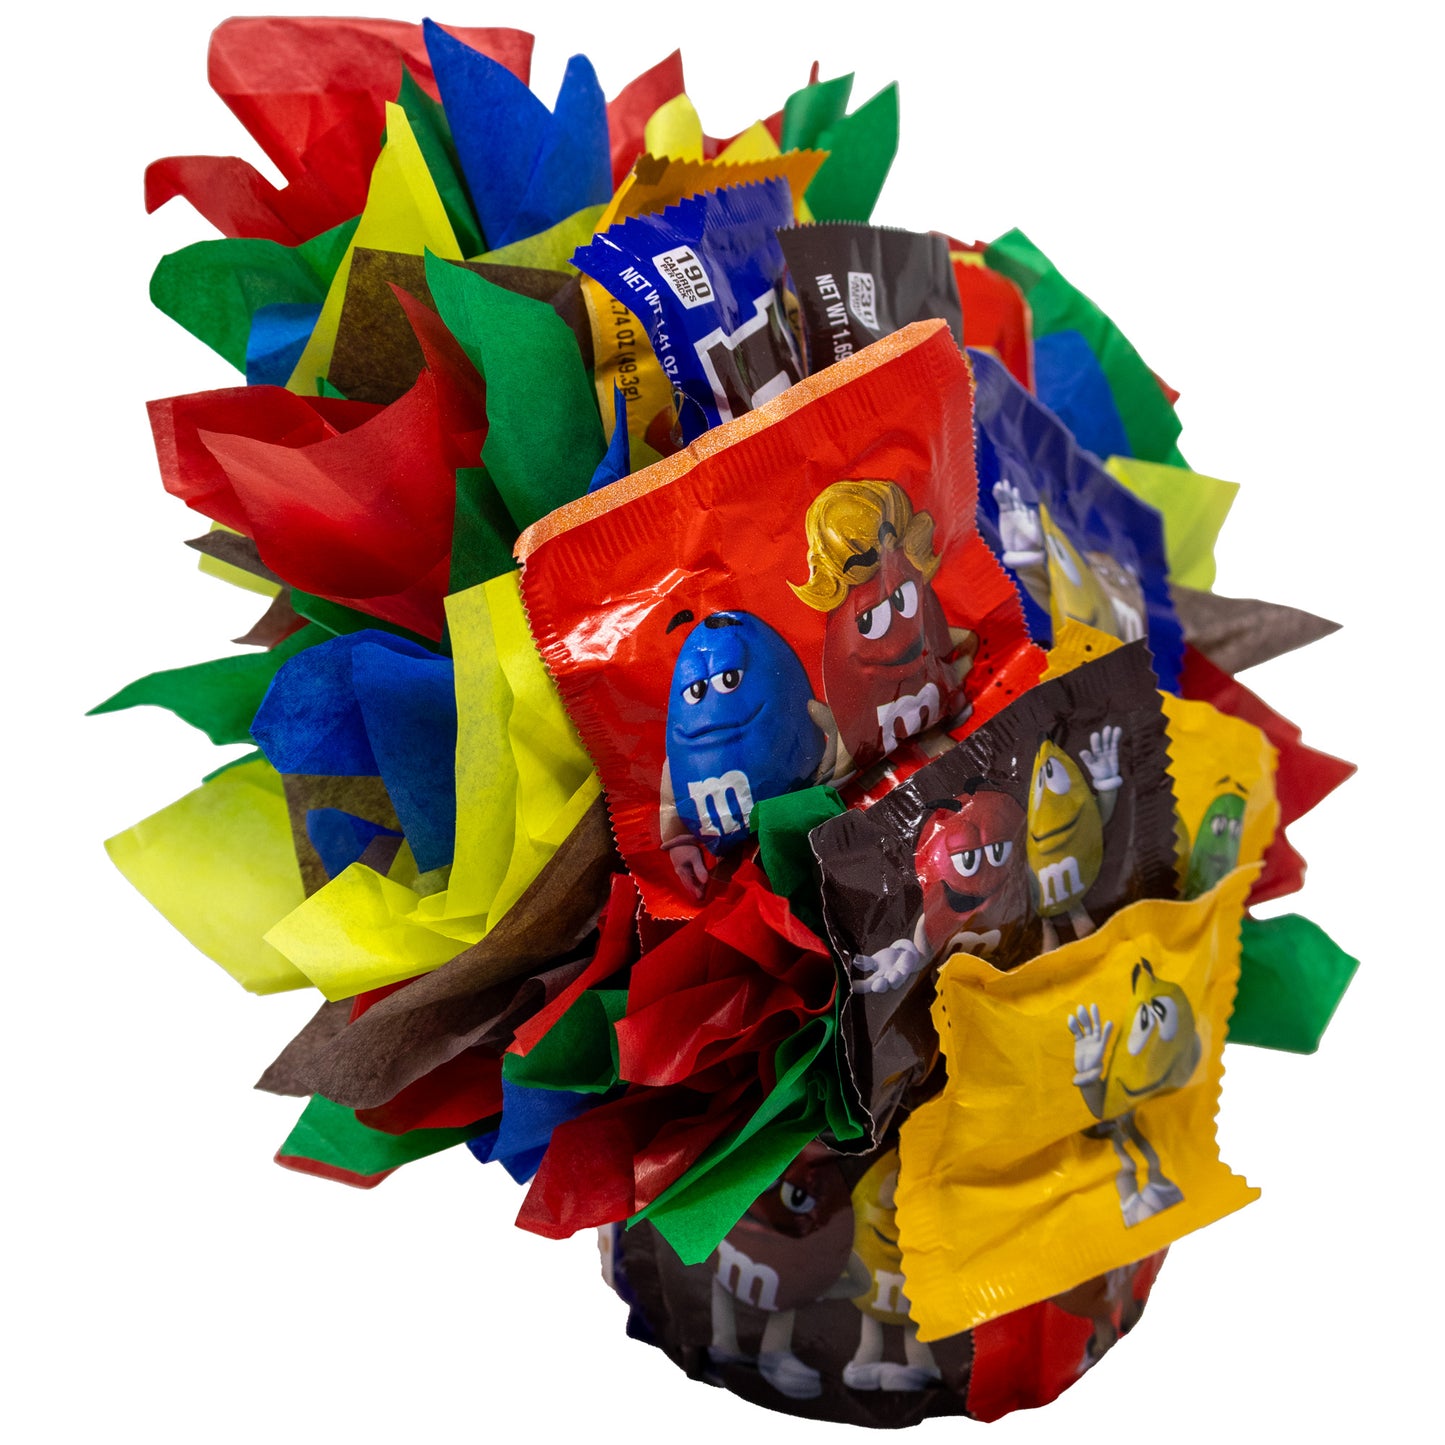 M&M Chocolate Candy Bouquet Gift with Fun Size and Full Size Candy Bars